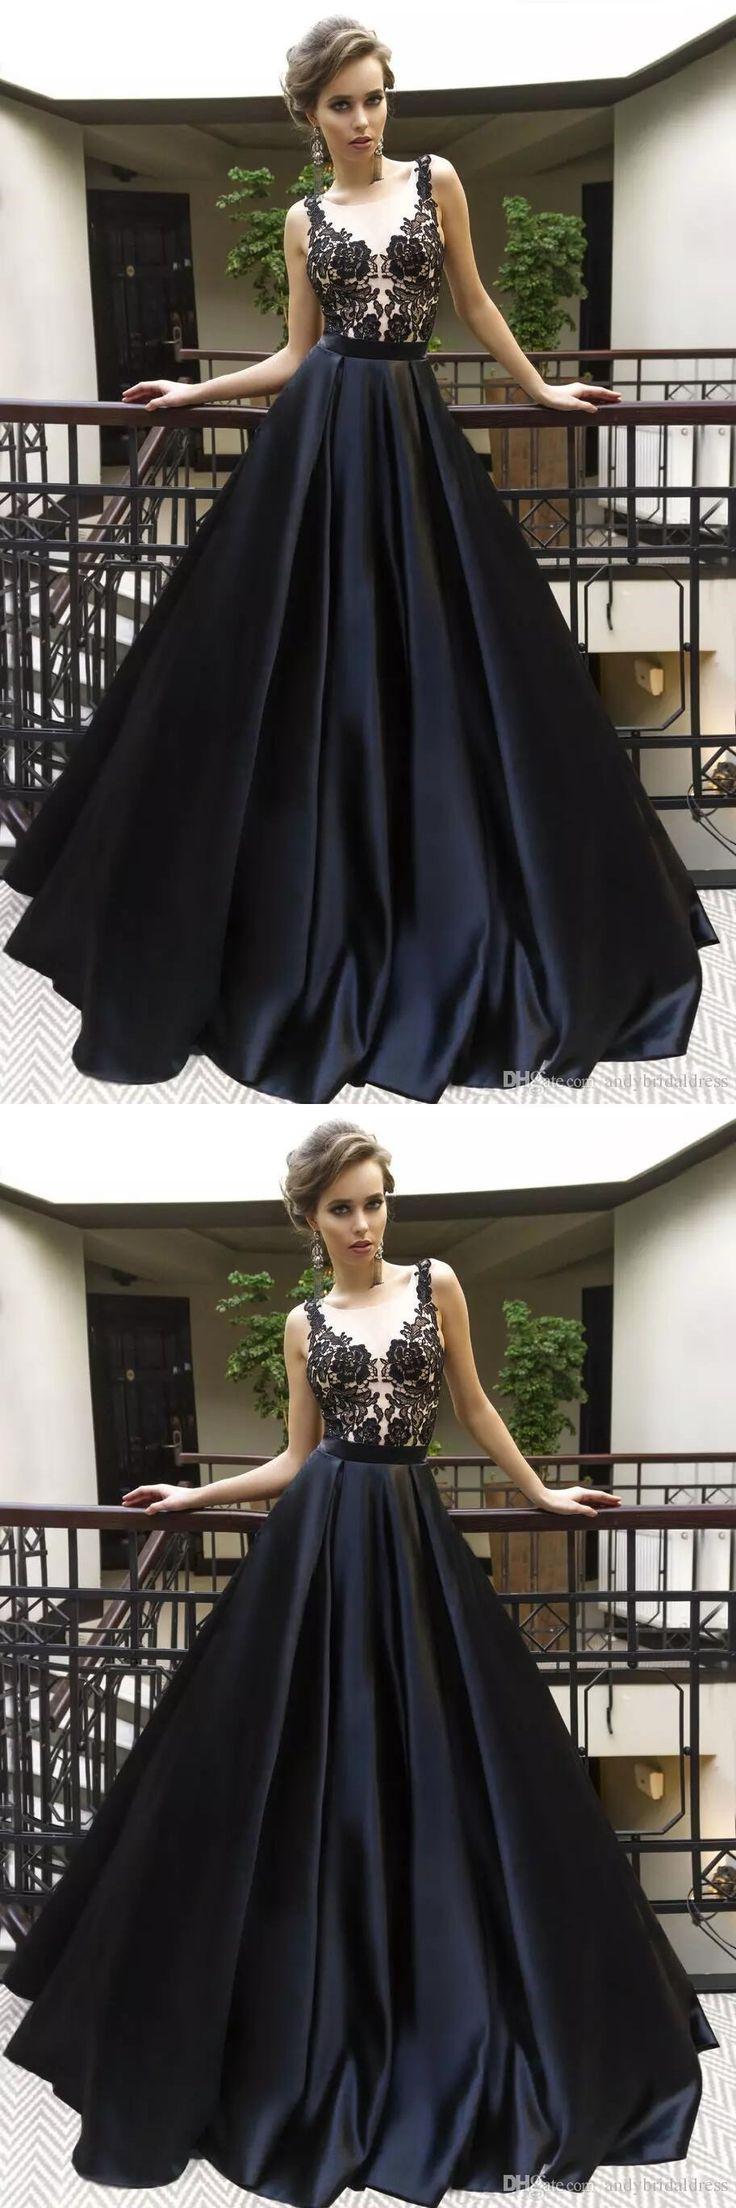 Hochzeit - Black Prom Dress 2018,Prom Dresses,Evening Gown, Graduation Party Dresses, Prom Dresses For Teens G361 From MeetBeauty